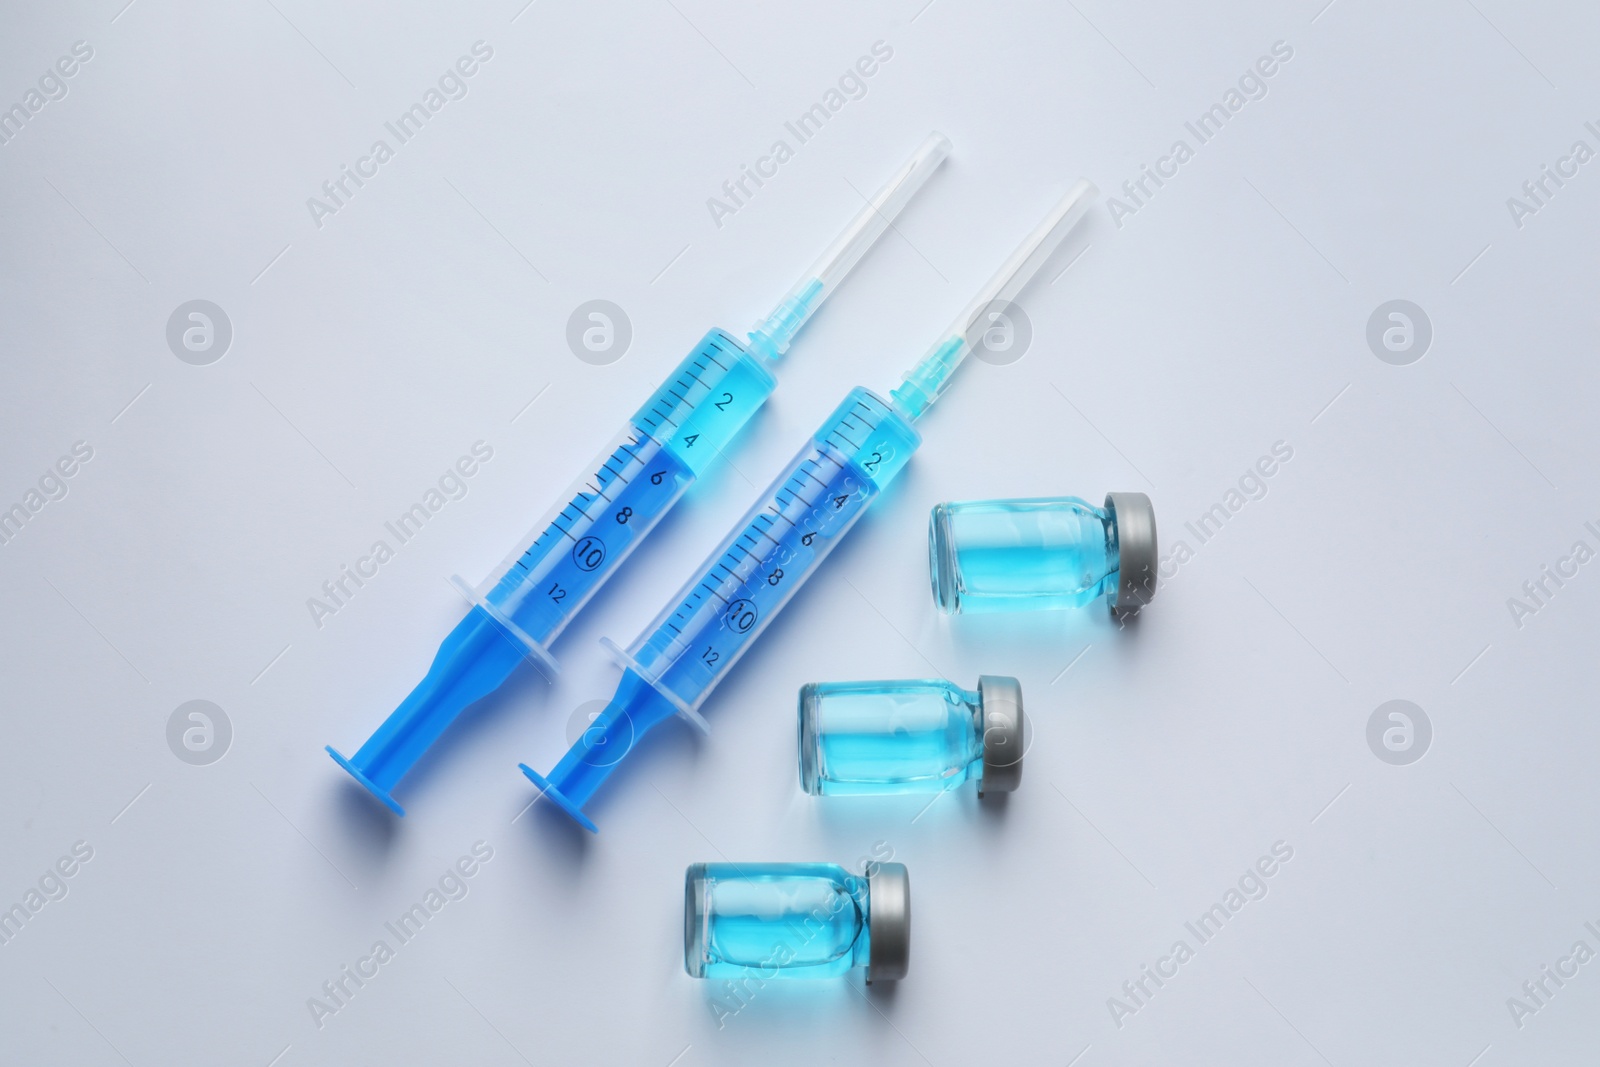 Photo of Disposable syringes with needles and vials on white background, top view